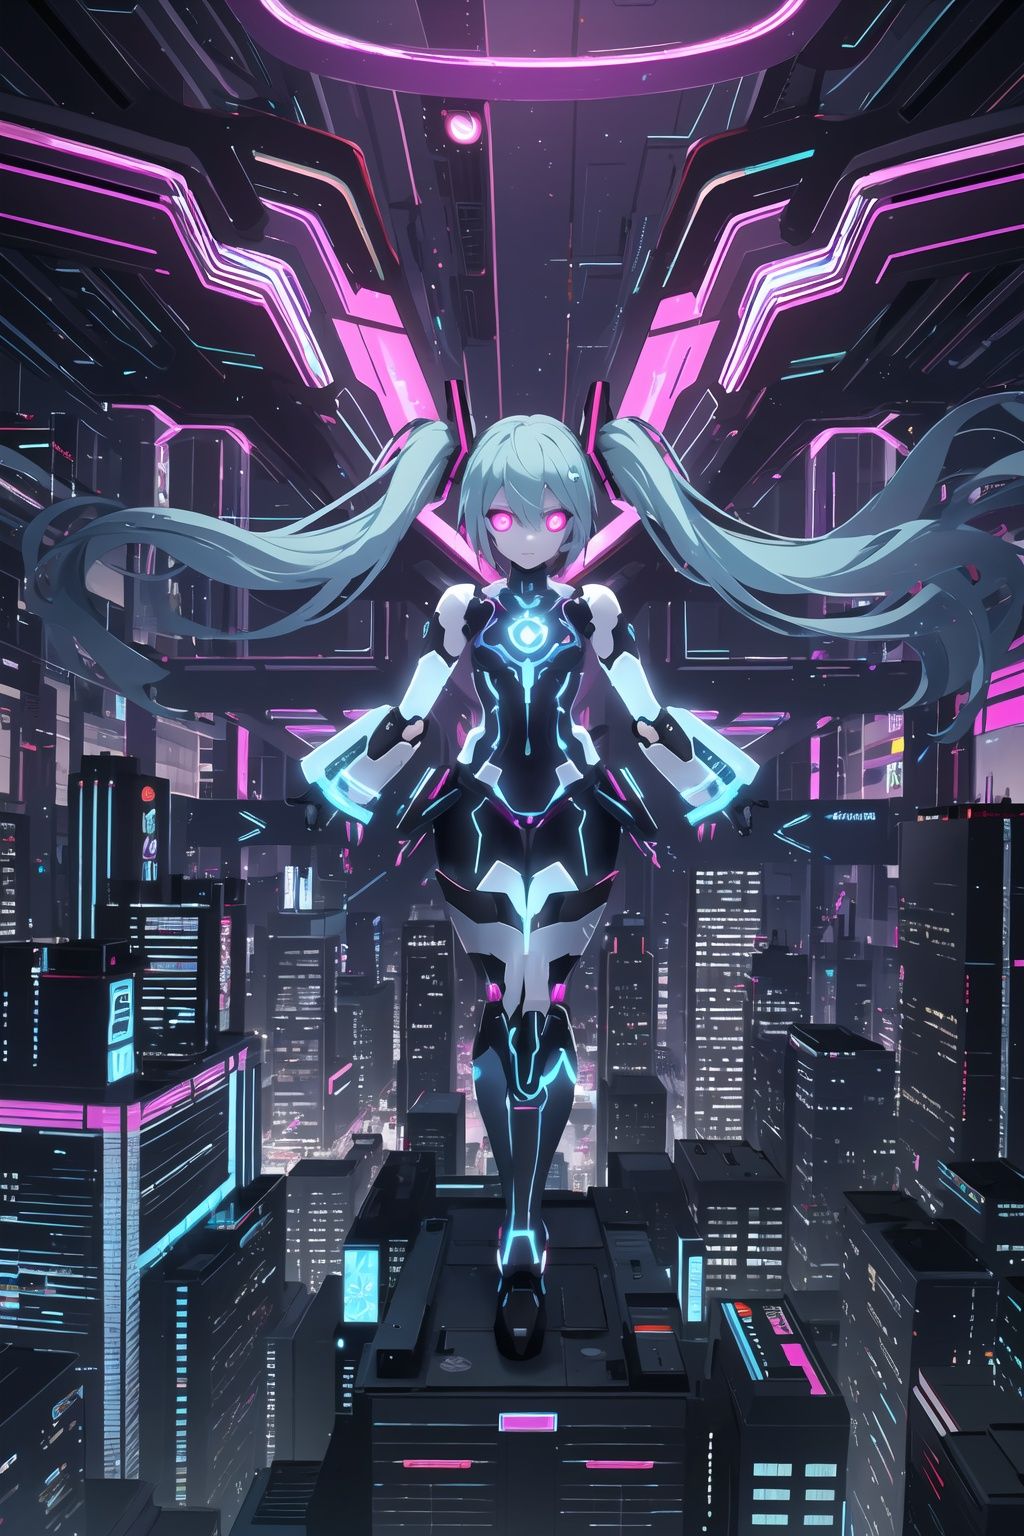 futuristic-style Hatsune Miku,cyberpunk elements,neon lights,holographic accessories,digital environment,advanced technology,robotic aesthetics,anime character,colorful hair,dynamic pose,urban backdrop,glowing eyes,virtual idol,high-tech fashion,immersive atmosphere,vibrant colors,future city skyline,cutting-edge design,stylish outfit,hologram effects,digital art,sci-fi elements,energetic vibe,youth culture,modern anime style,holographic display,illuminated cityscape,night scene,advanced gadgets,cool attitude,, masterpiece, best quality,